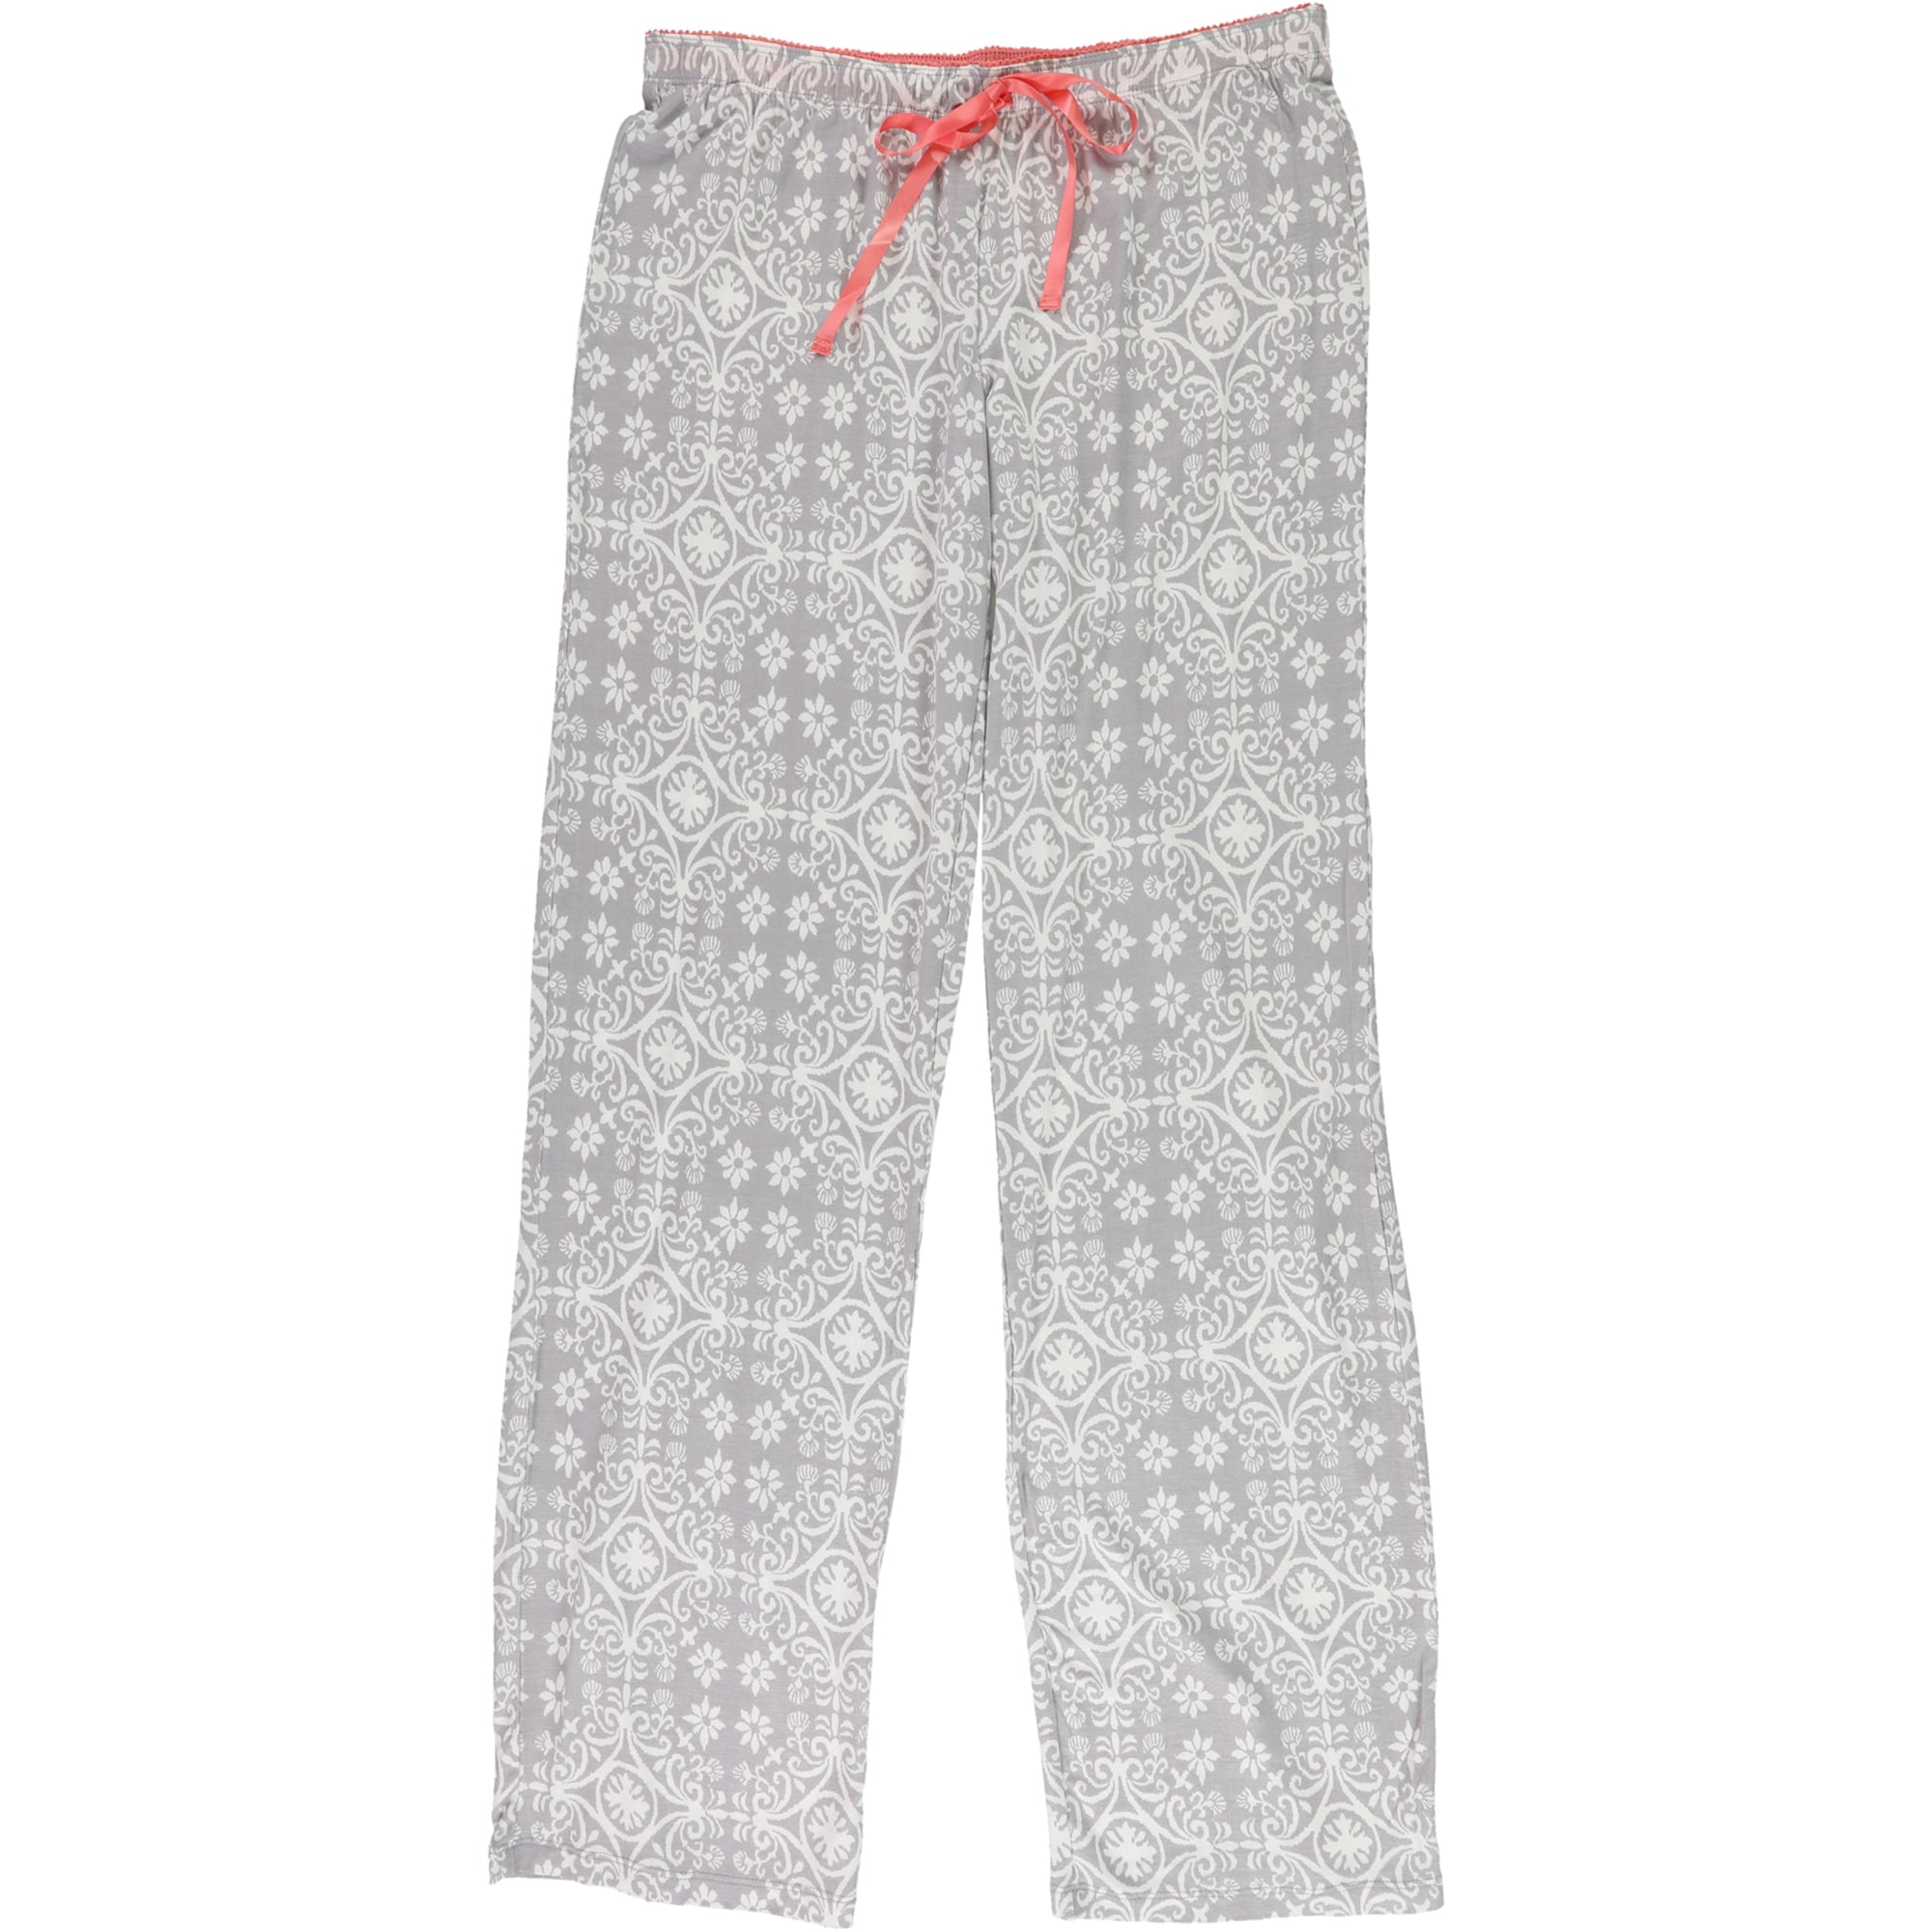 Adr Women's Plush Pajama Pants With Pockets, Joggers With